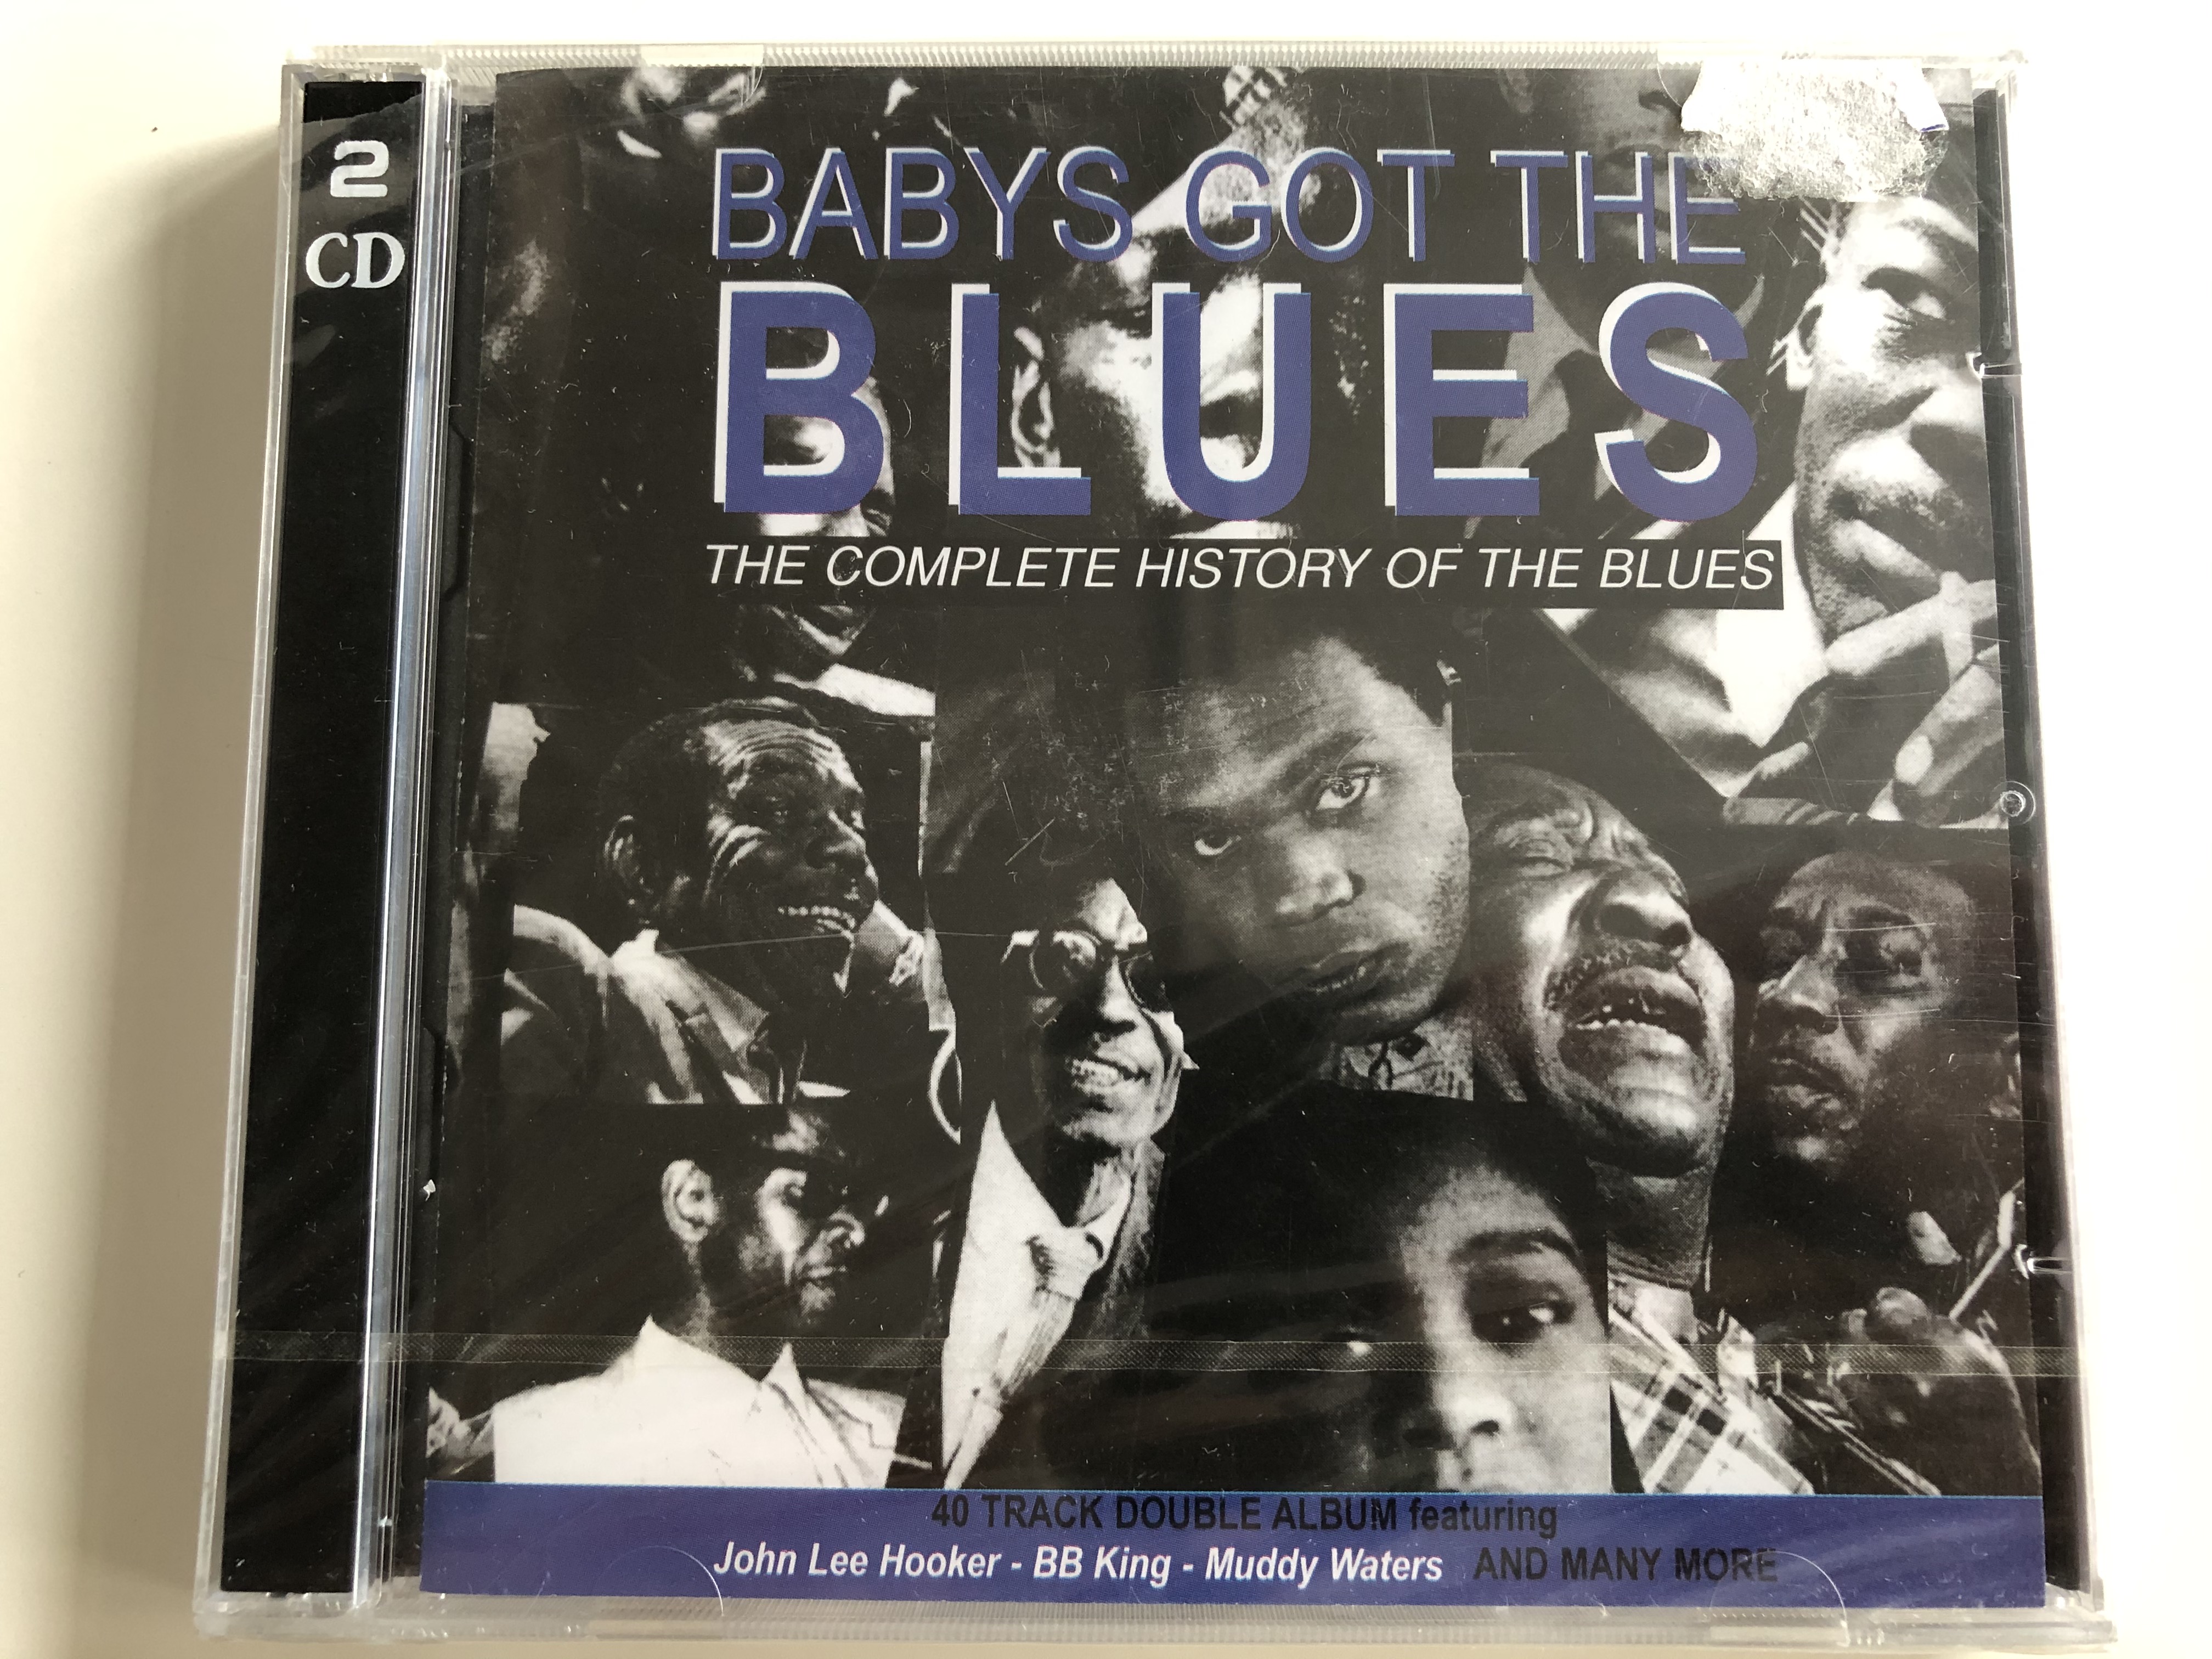 babys-got-the-blues-the-complete-history-of-the-blues-40-track-double-album-featuring-john-lee-hooker-bb-king-muddy-waters-and-many-more-age-of-panik-2x-audio-cd-1999-aop125-1-.jpg